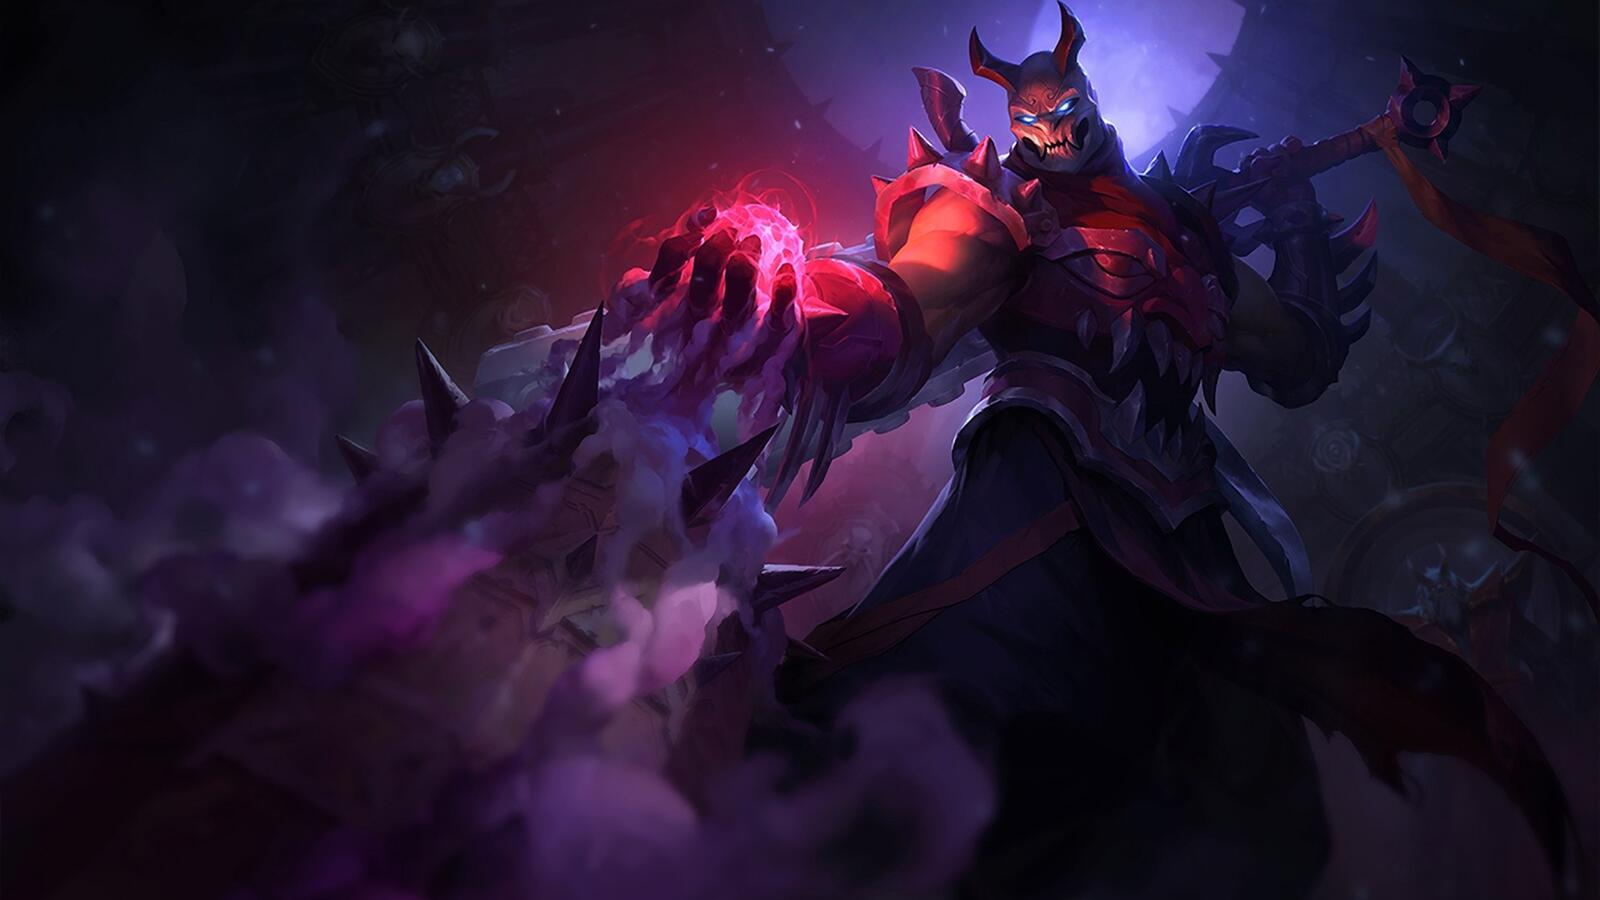 Free photo The dark demon from League of Legends